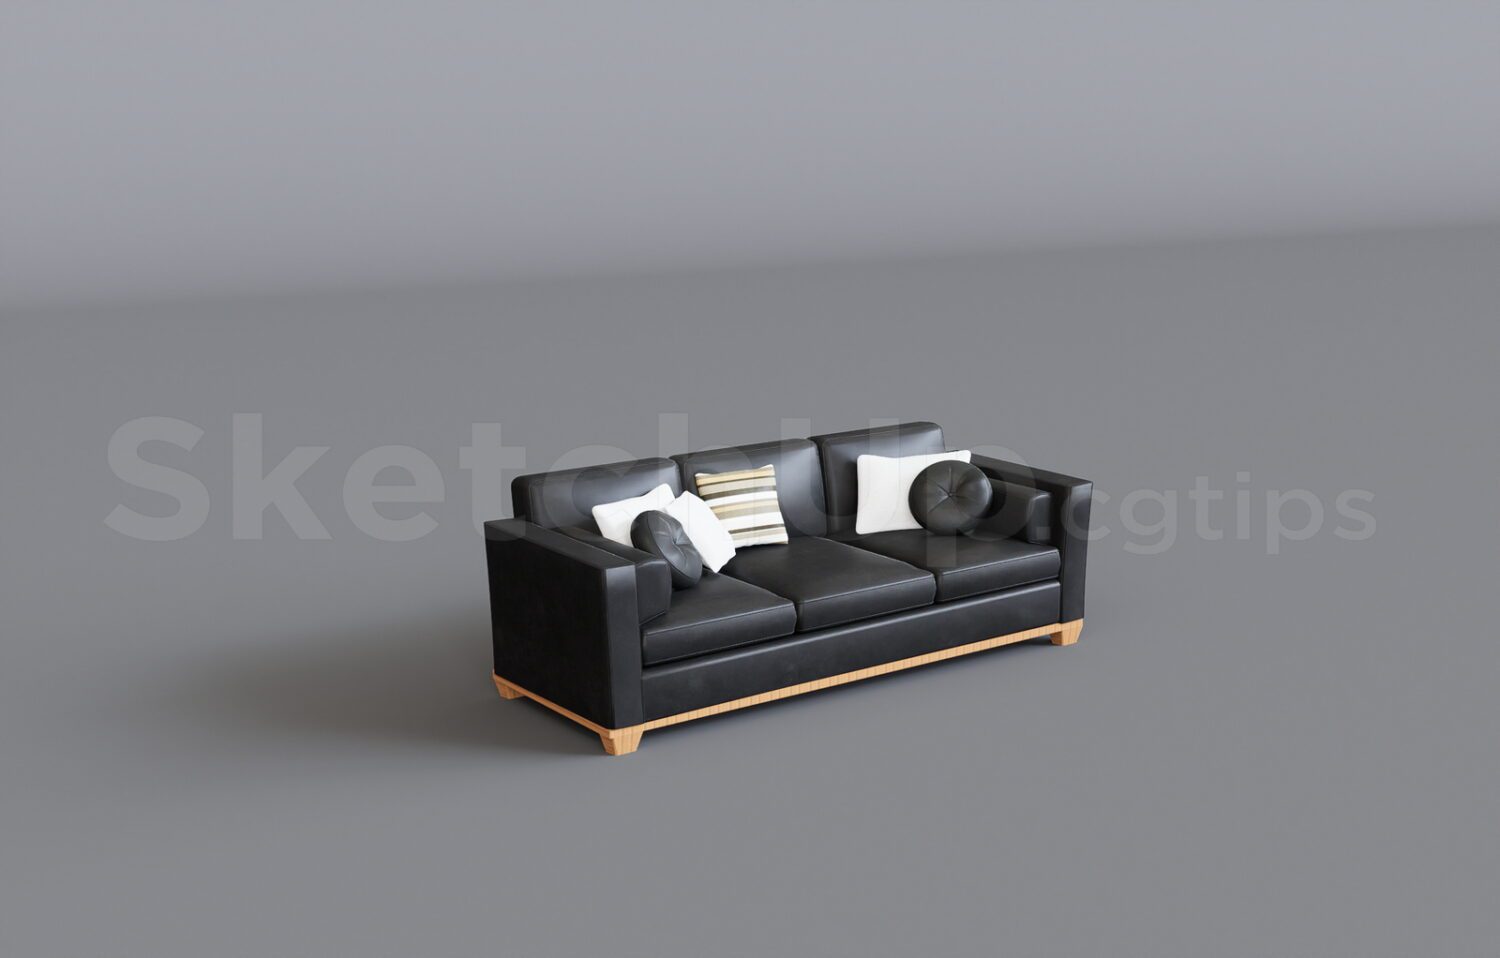 13856. Free Sketchup Sofa Model Download 2 Scaled 